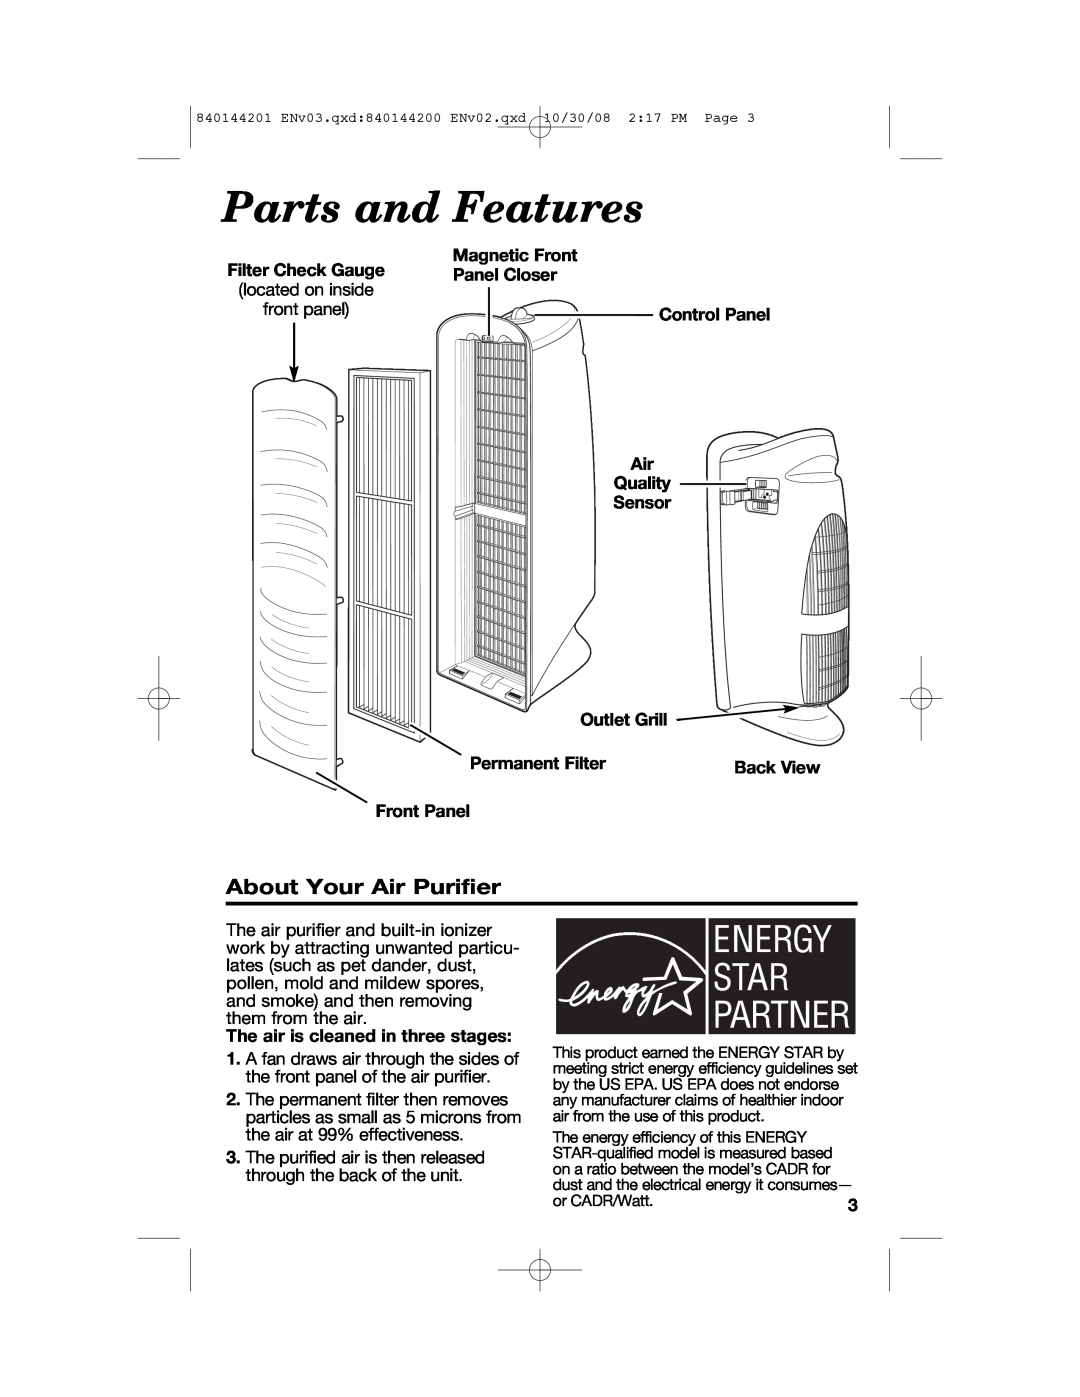 Hamilton Beach 04992F, 840144201 manual Parts and Features, About Your Air Purifier 